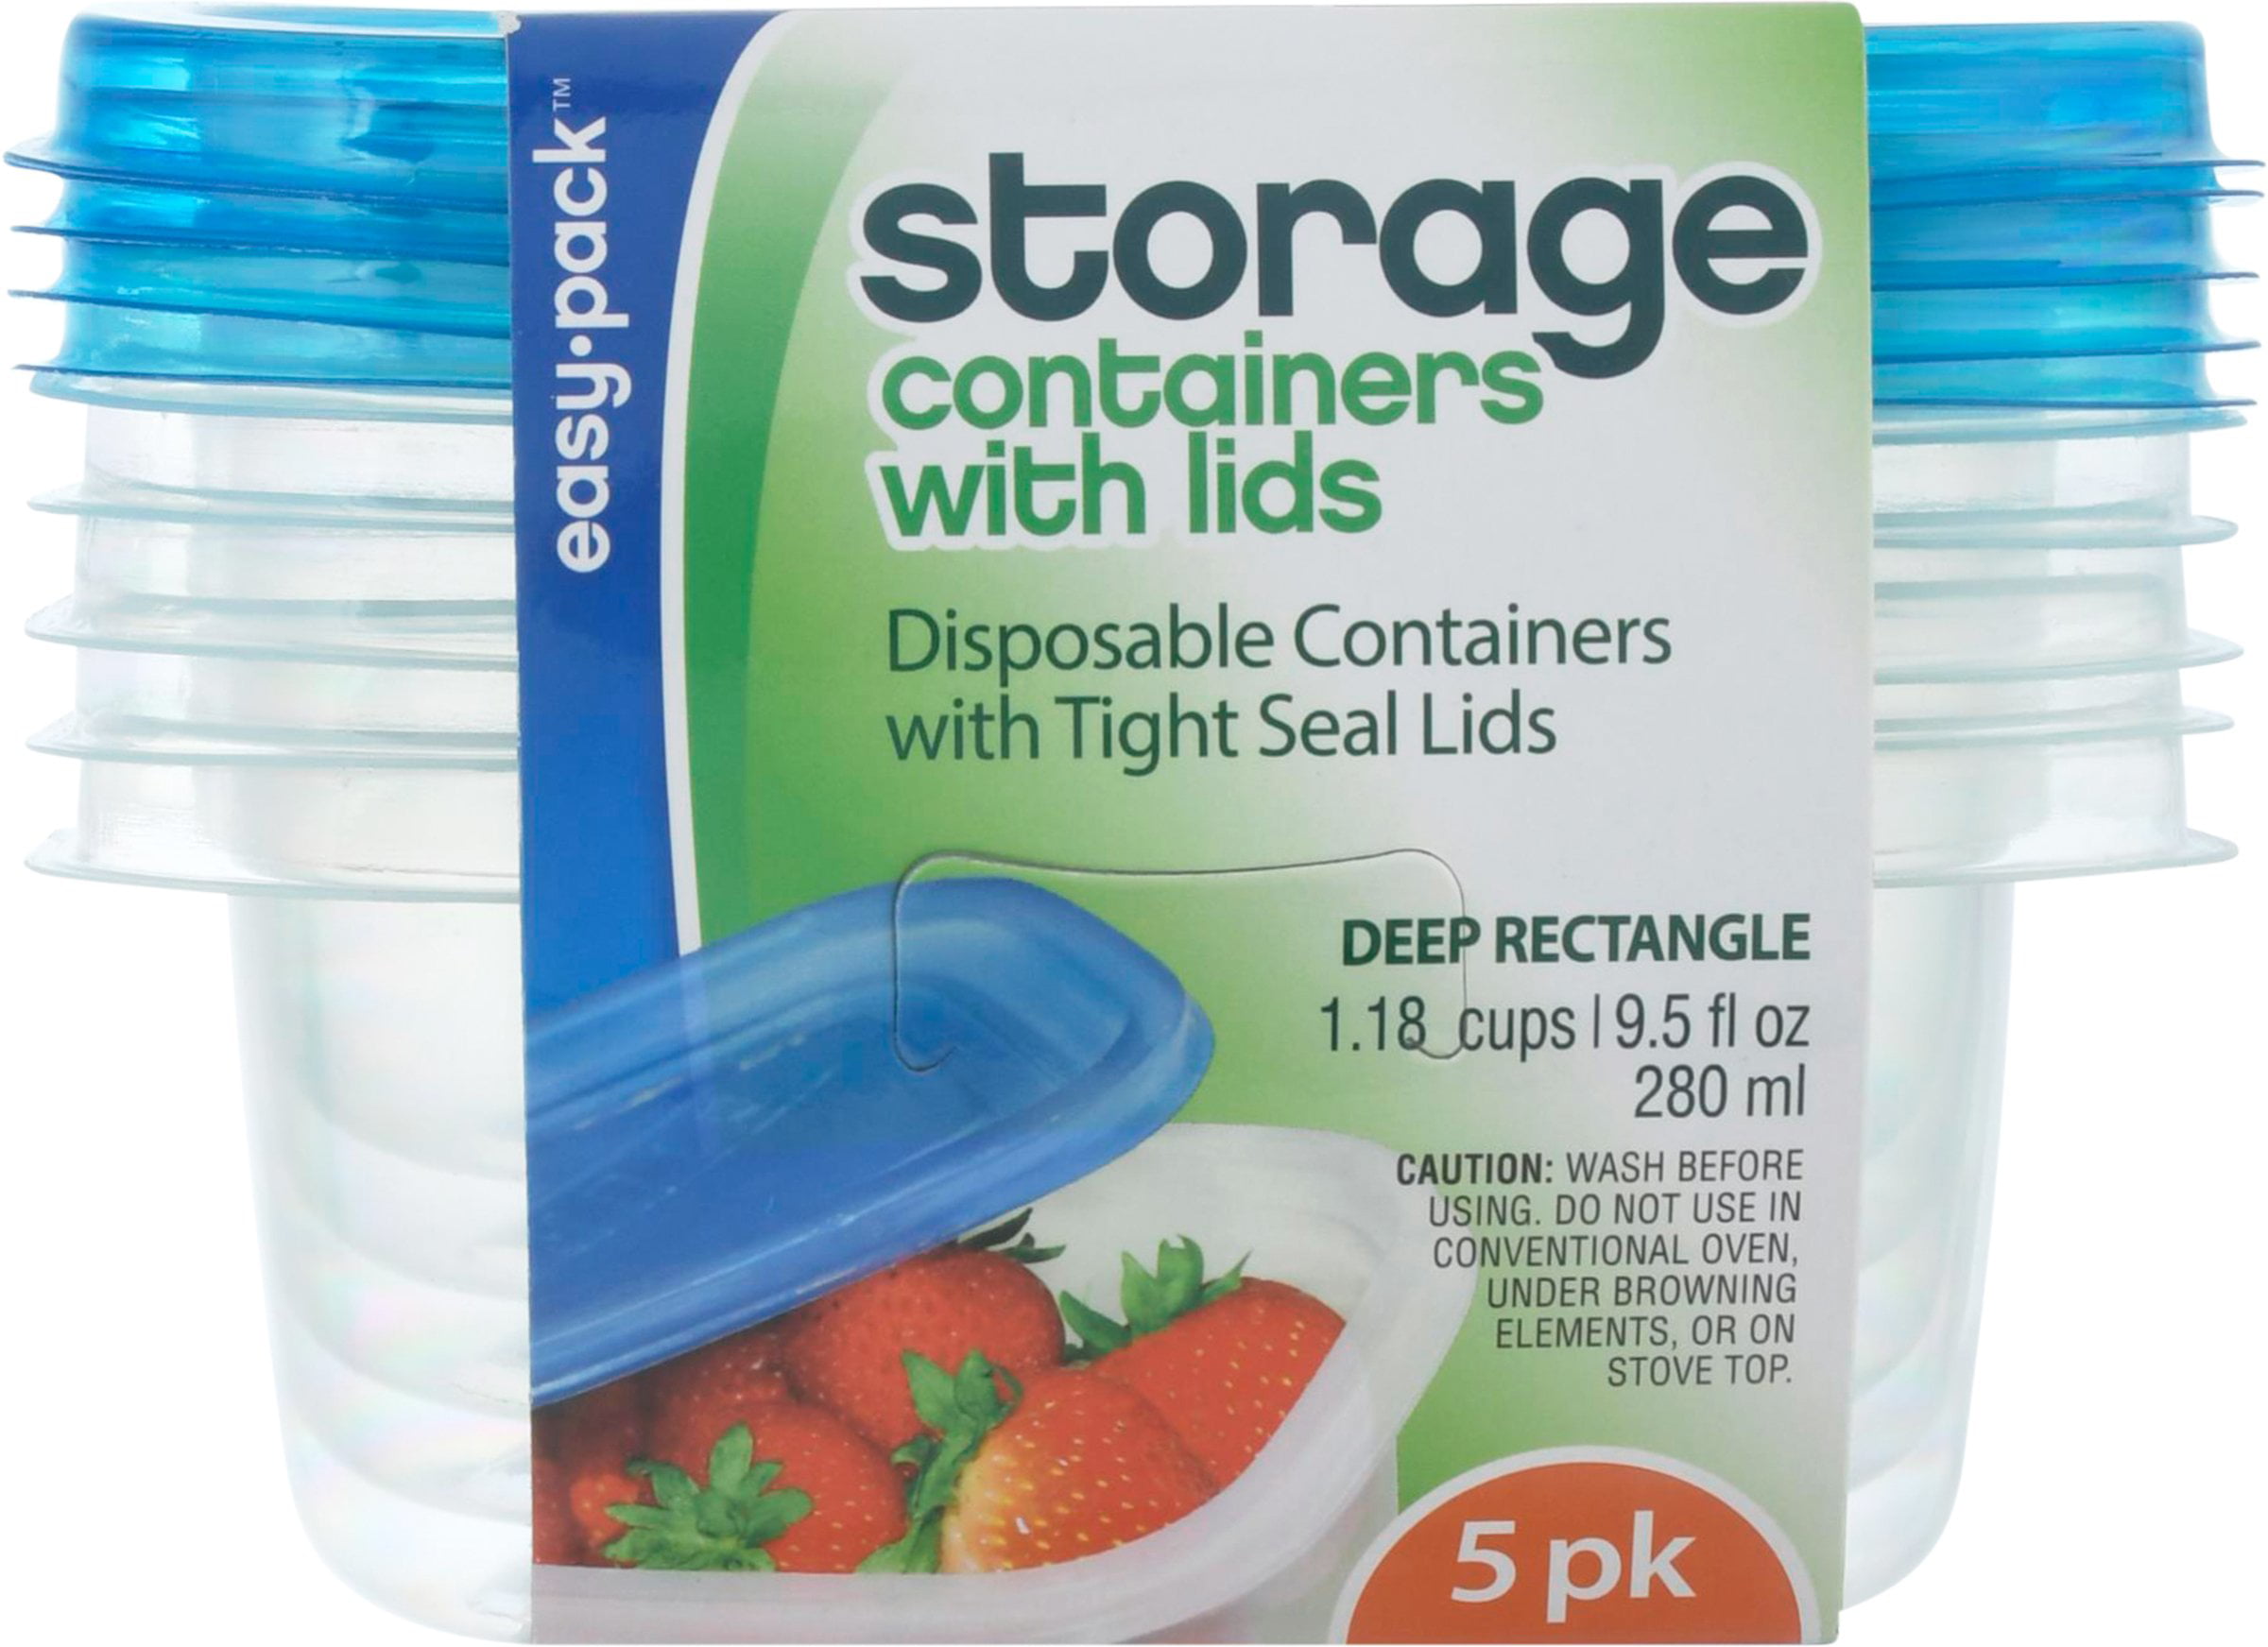 FLP 8010 Easy Pack 11 Fluid Ounce Round Plastic Storage Containers With Lids  - Assorted Colors: Covered Storage Small Up To 1 Liter or 33 Ounces  (740985880104-1)